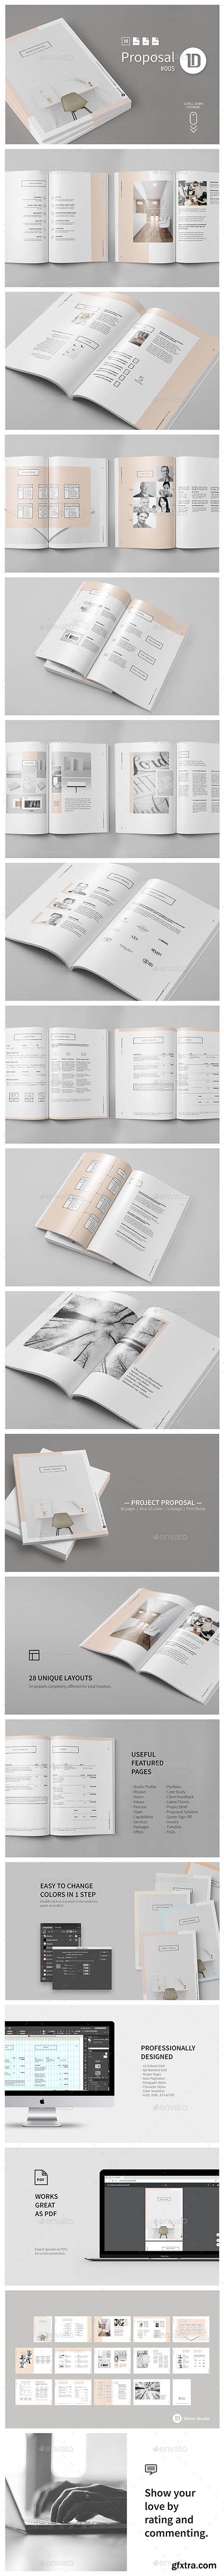 Graphicriver Project Proposal Template 005 Minimalist 16454599